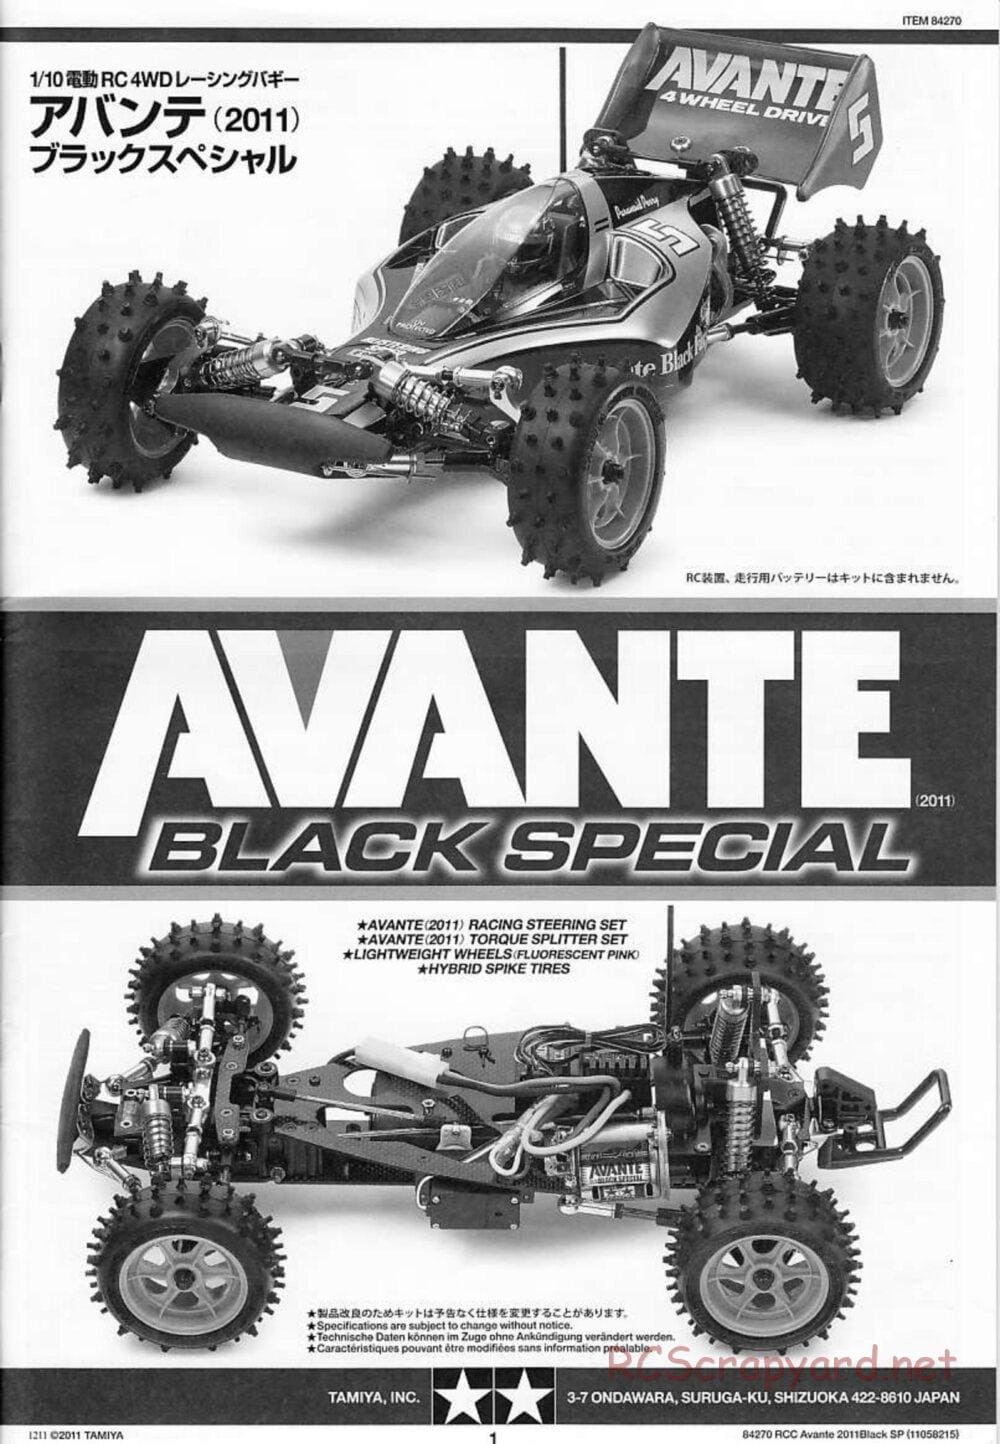 Tamiya - Avante 2011 - Black Special Chassis - Manual - Page 1